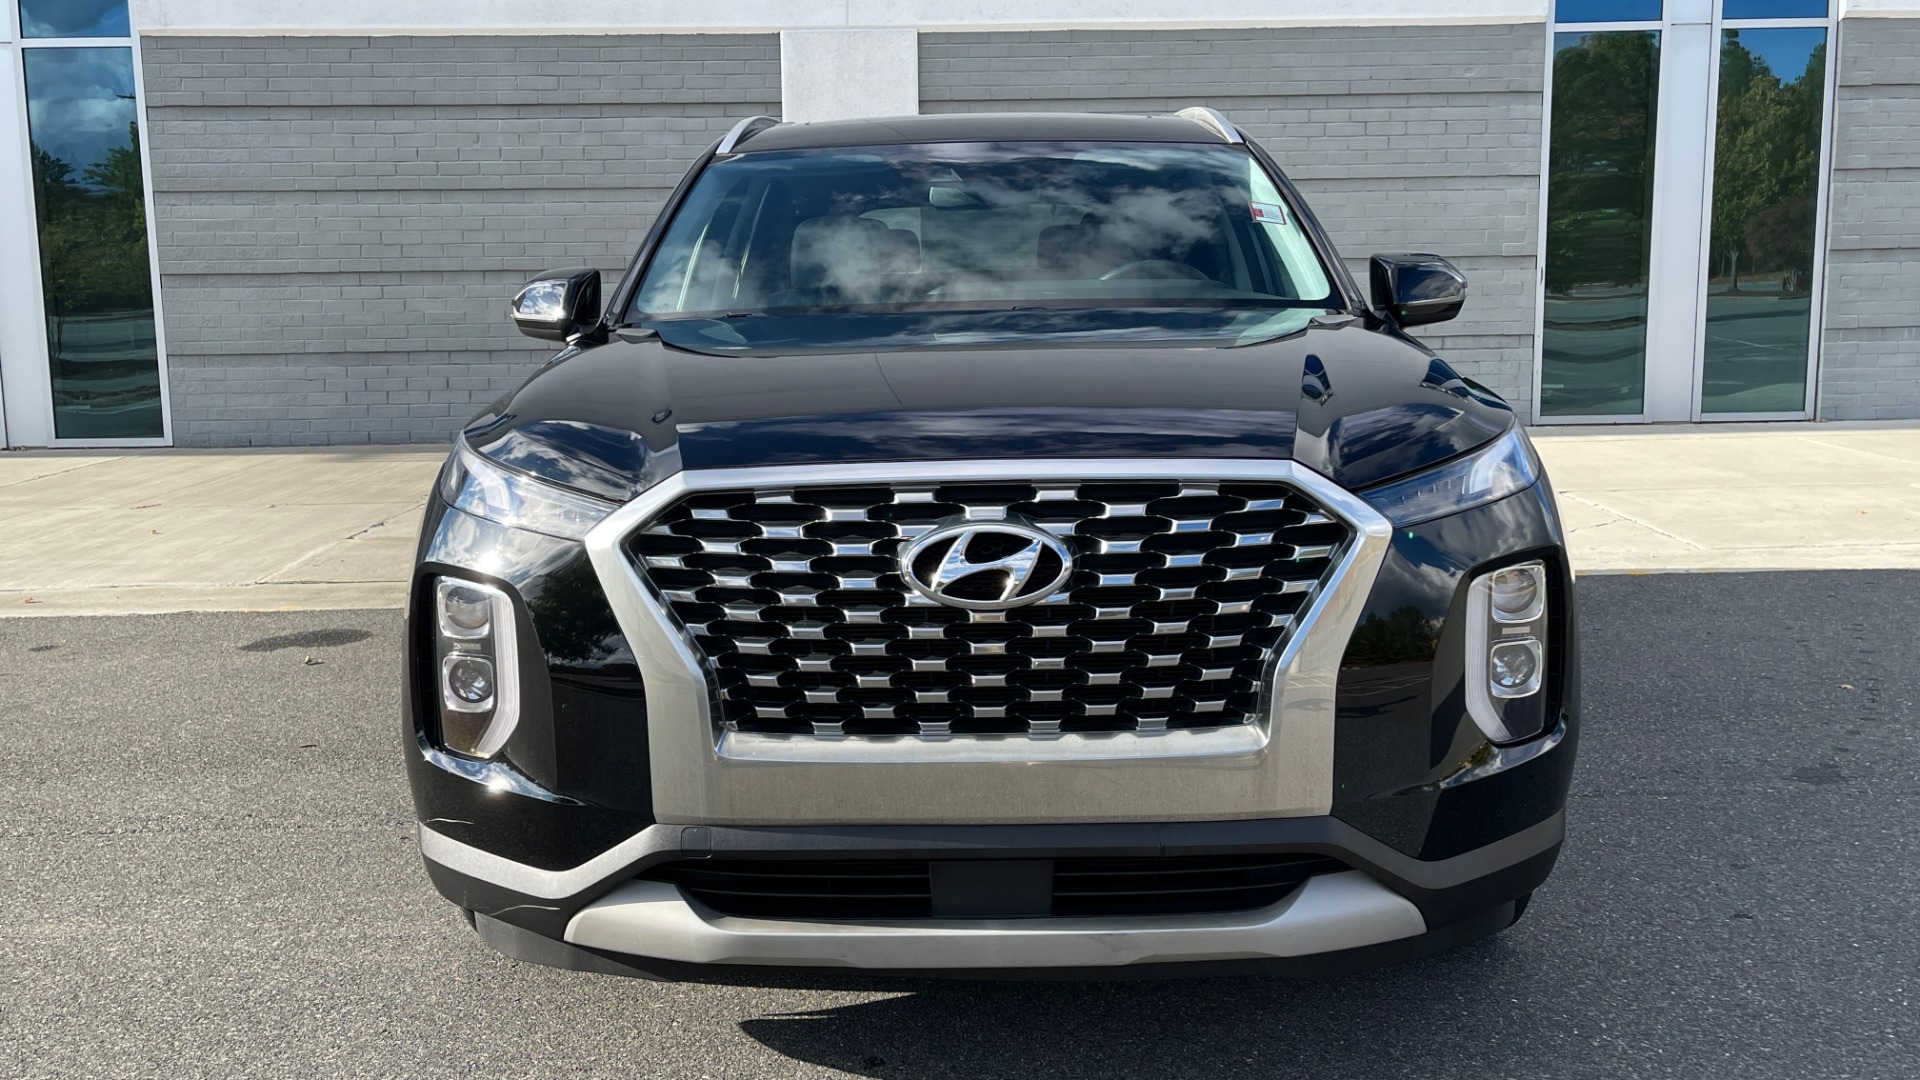 Used 2020 Hyundai PALISADE SEL / 3.8L V6 / FWD / 8-SPD AUTO / SUNROOF / 3-ROW / REARVIEW for sale Sold at Formula Imports in Charlotte NC 28227 7